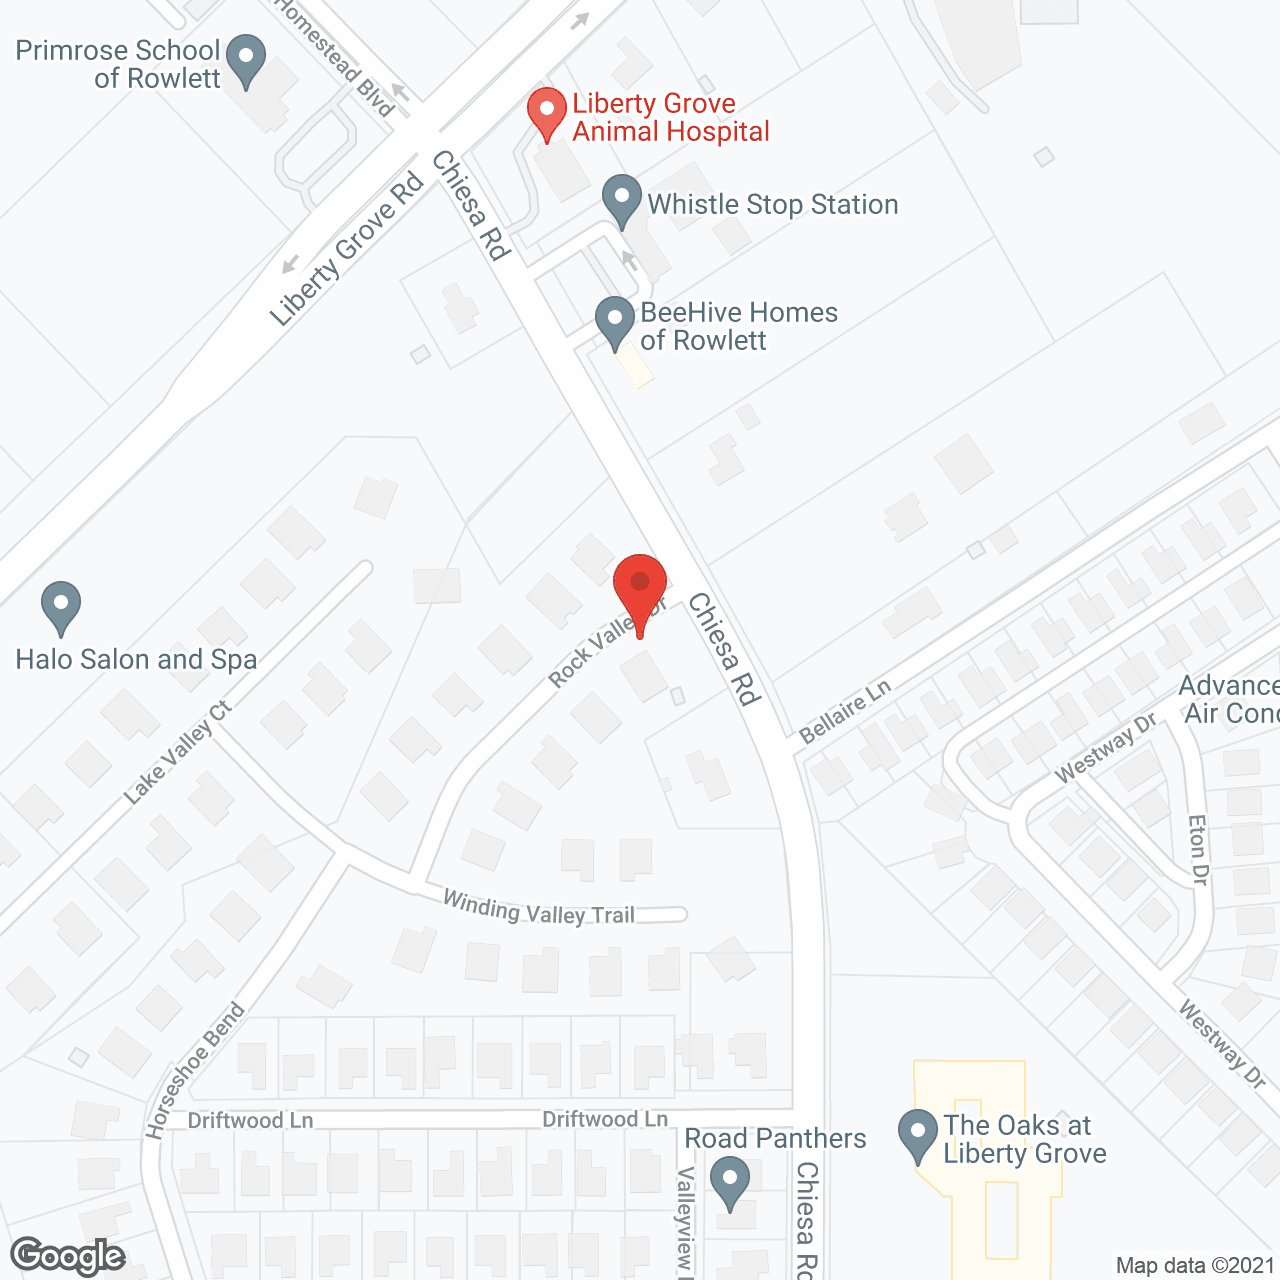 BeeHive Homes of Rowlett Memory Care in google map